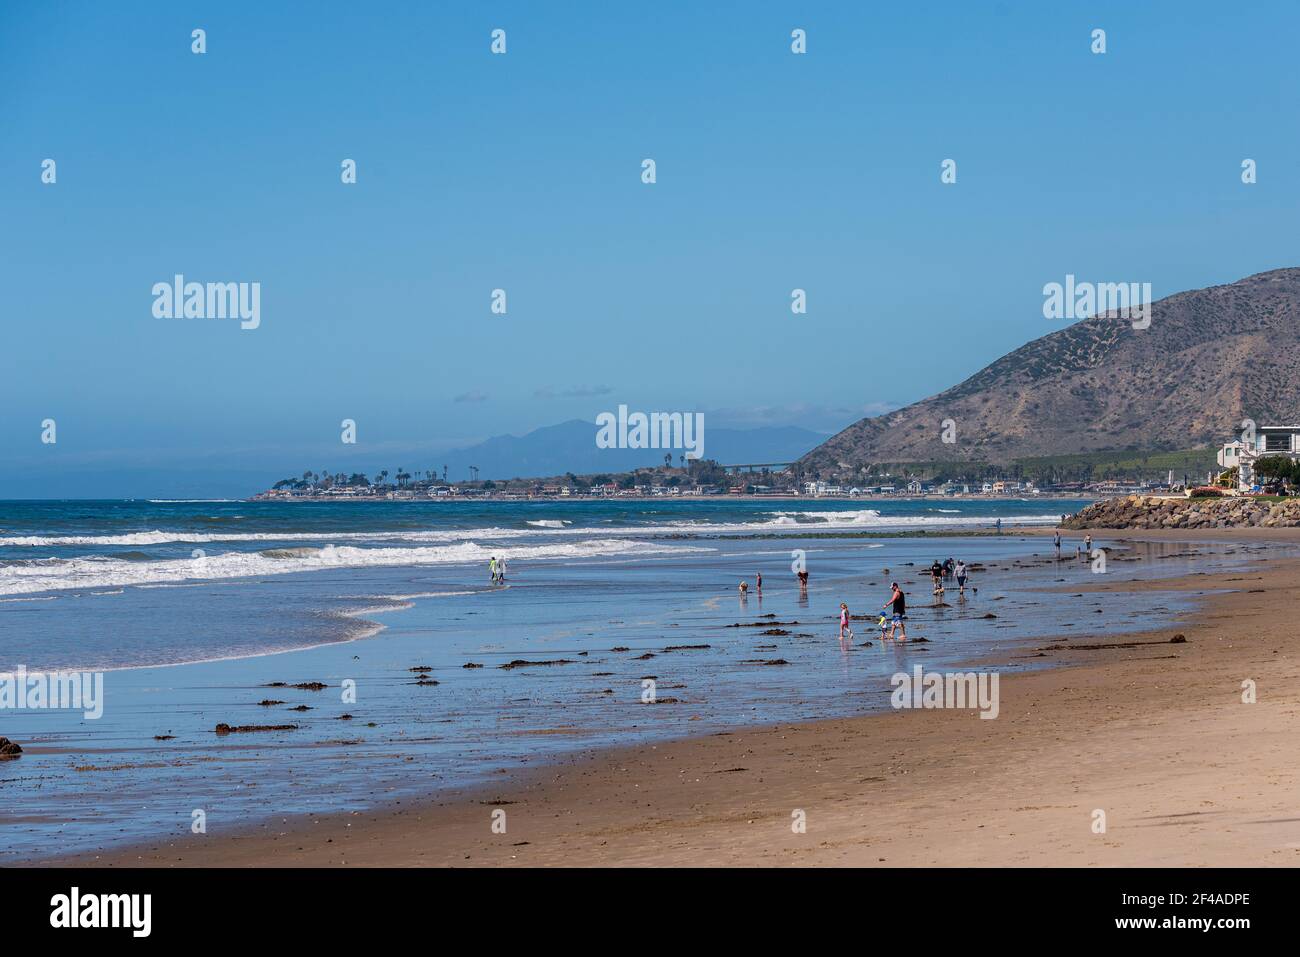 Sandy beach with tourists playing in the ocean, breaking waves and blue skies. Stock Photo